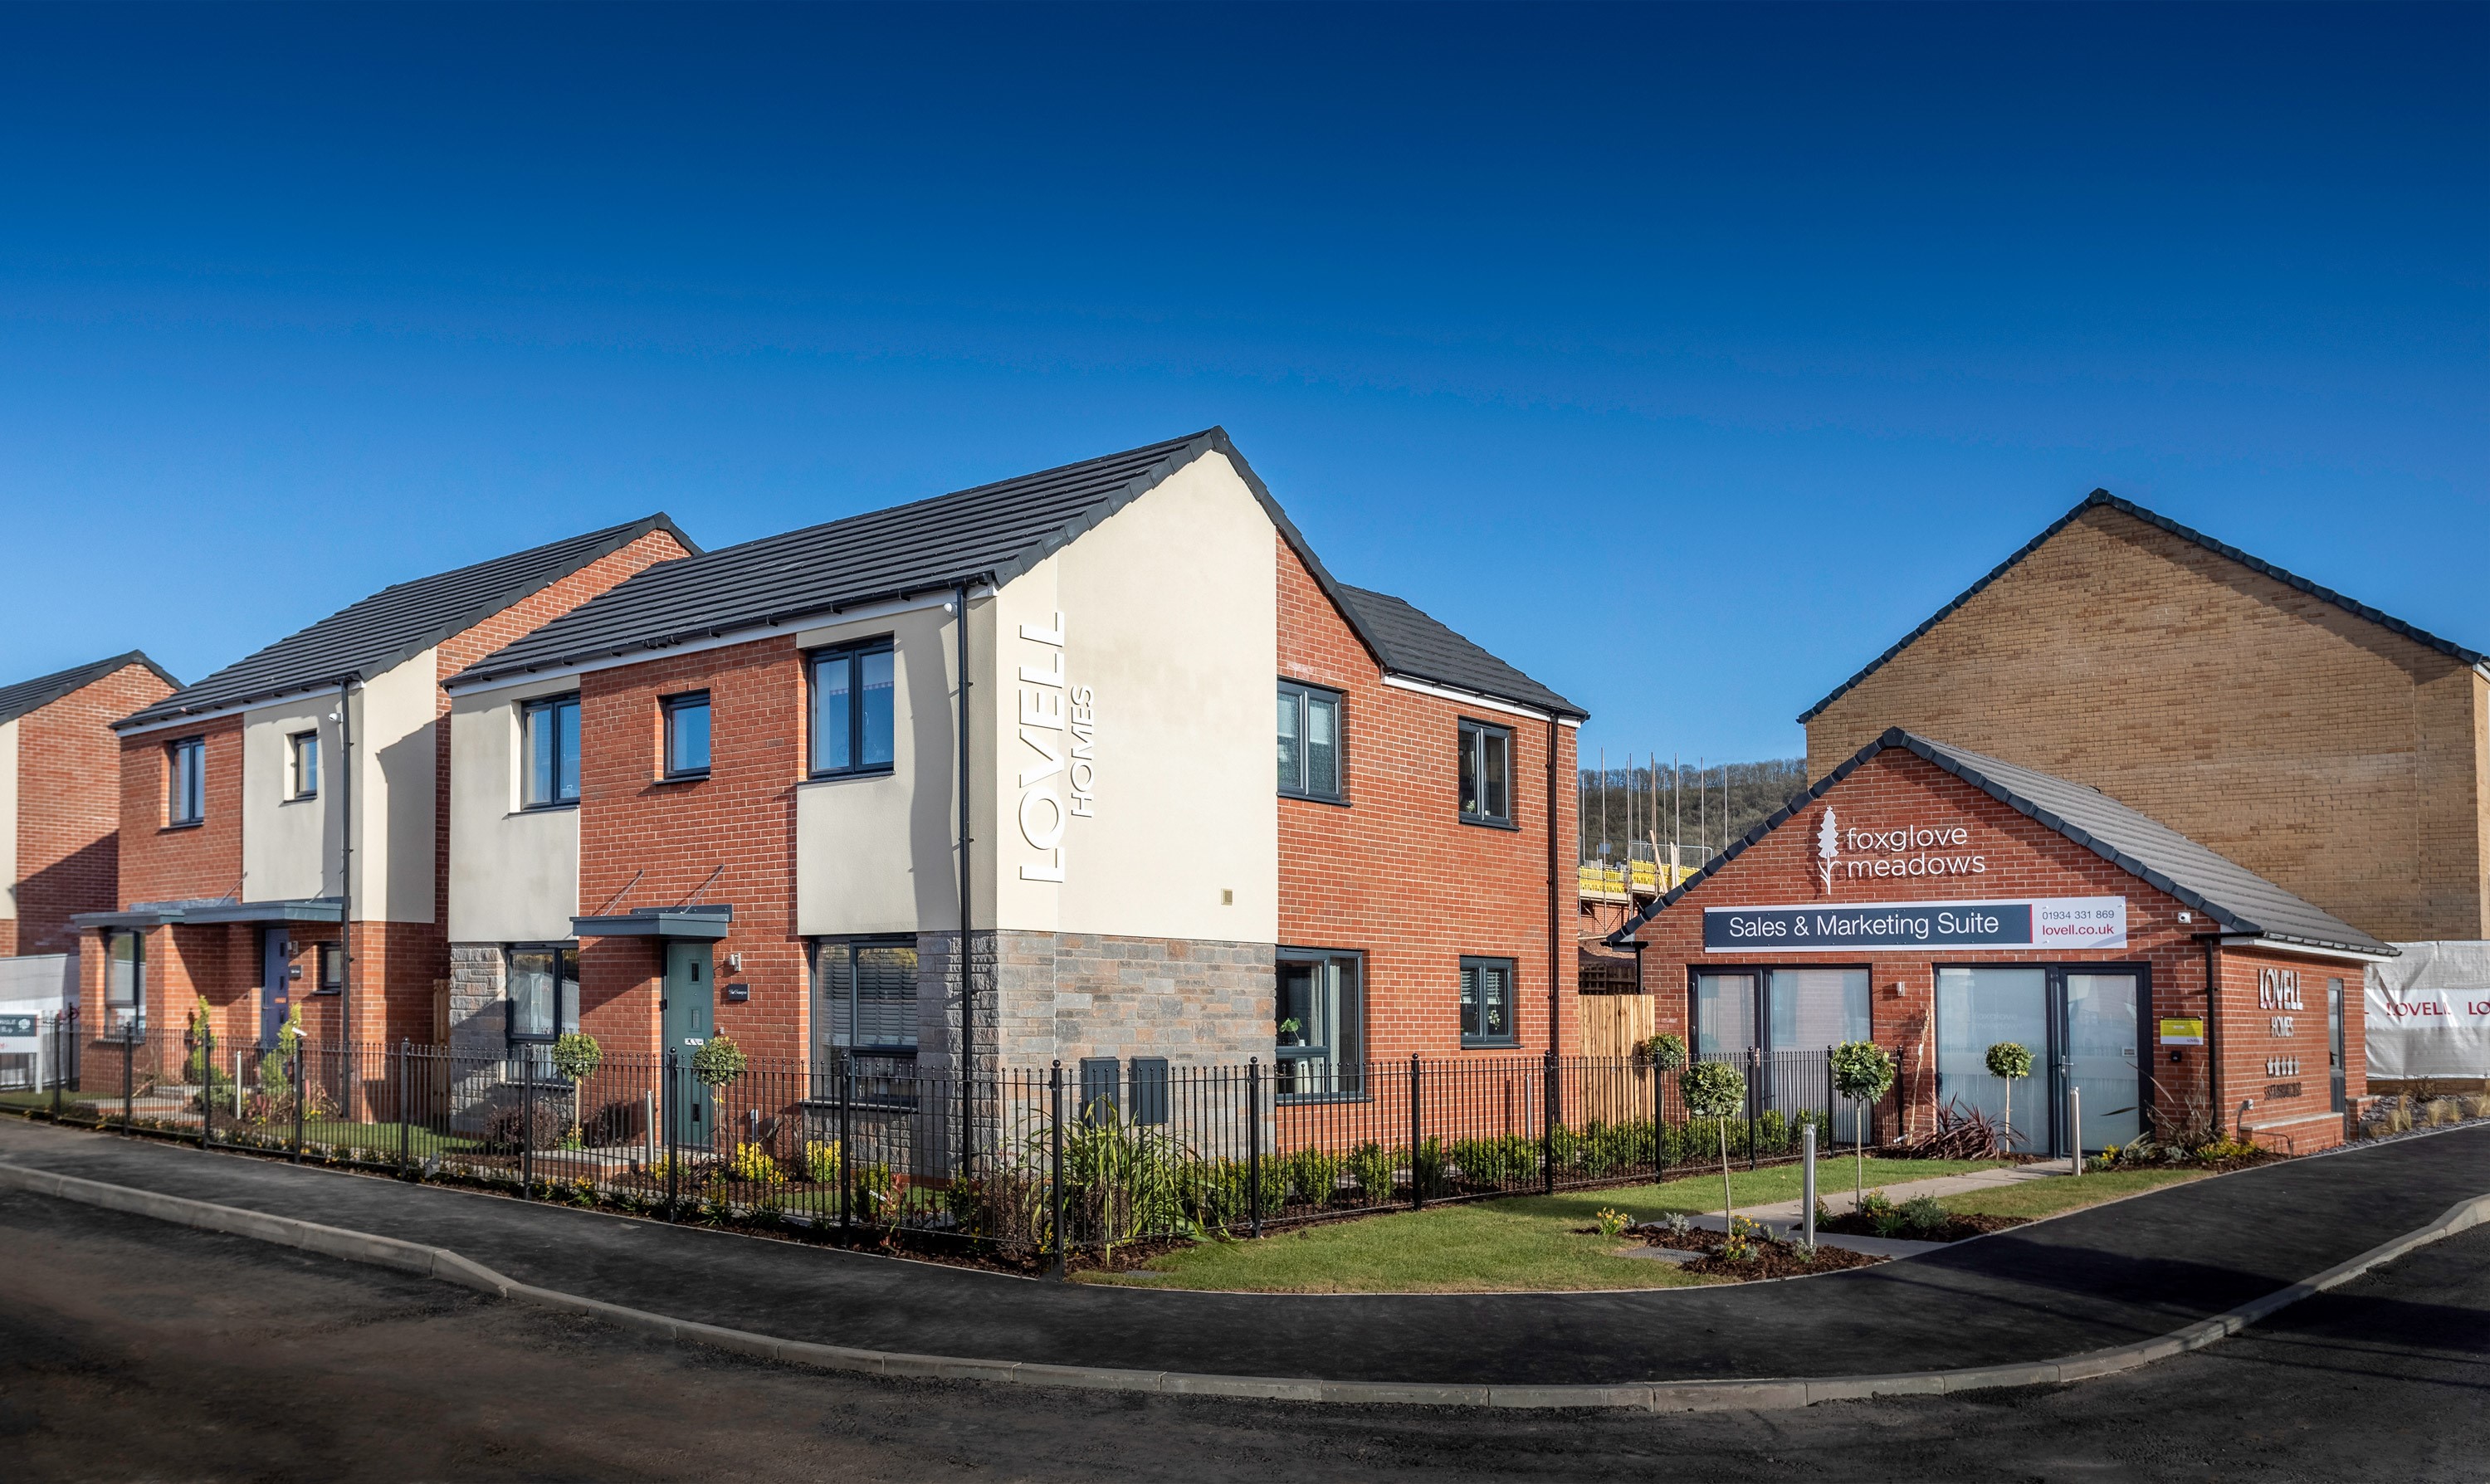 hbs new energies celebreates lovell homes foxglove meadows solar contract win